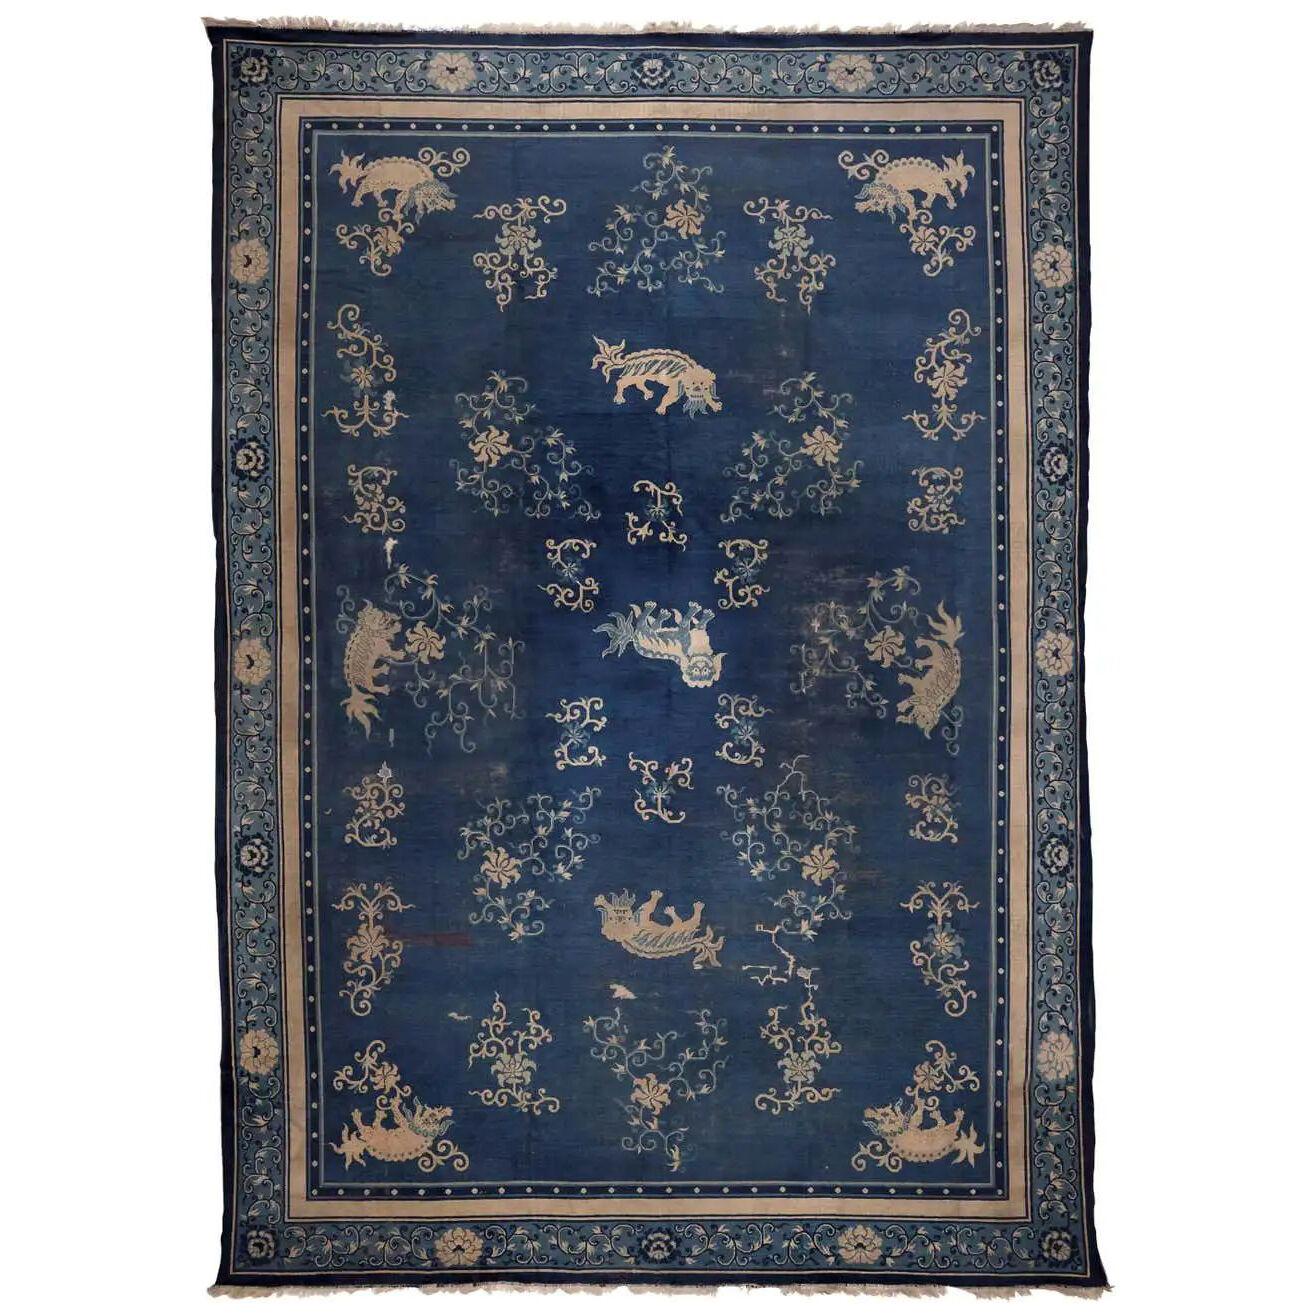 Ningshia, Chinese Export, Hand Knotted Wool, Antique Rug, circa 1920